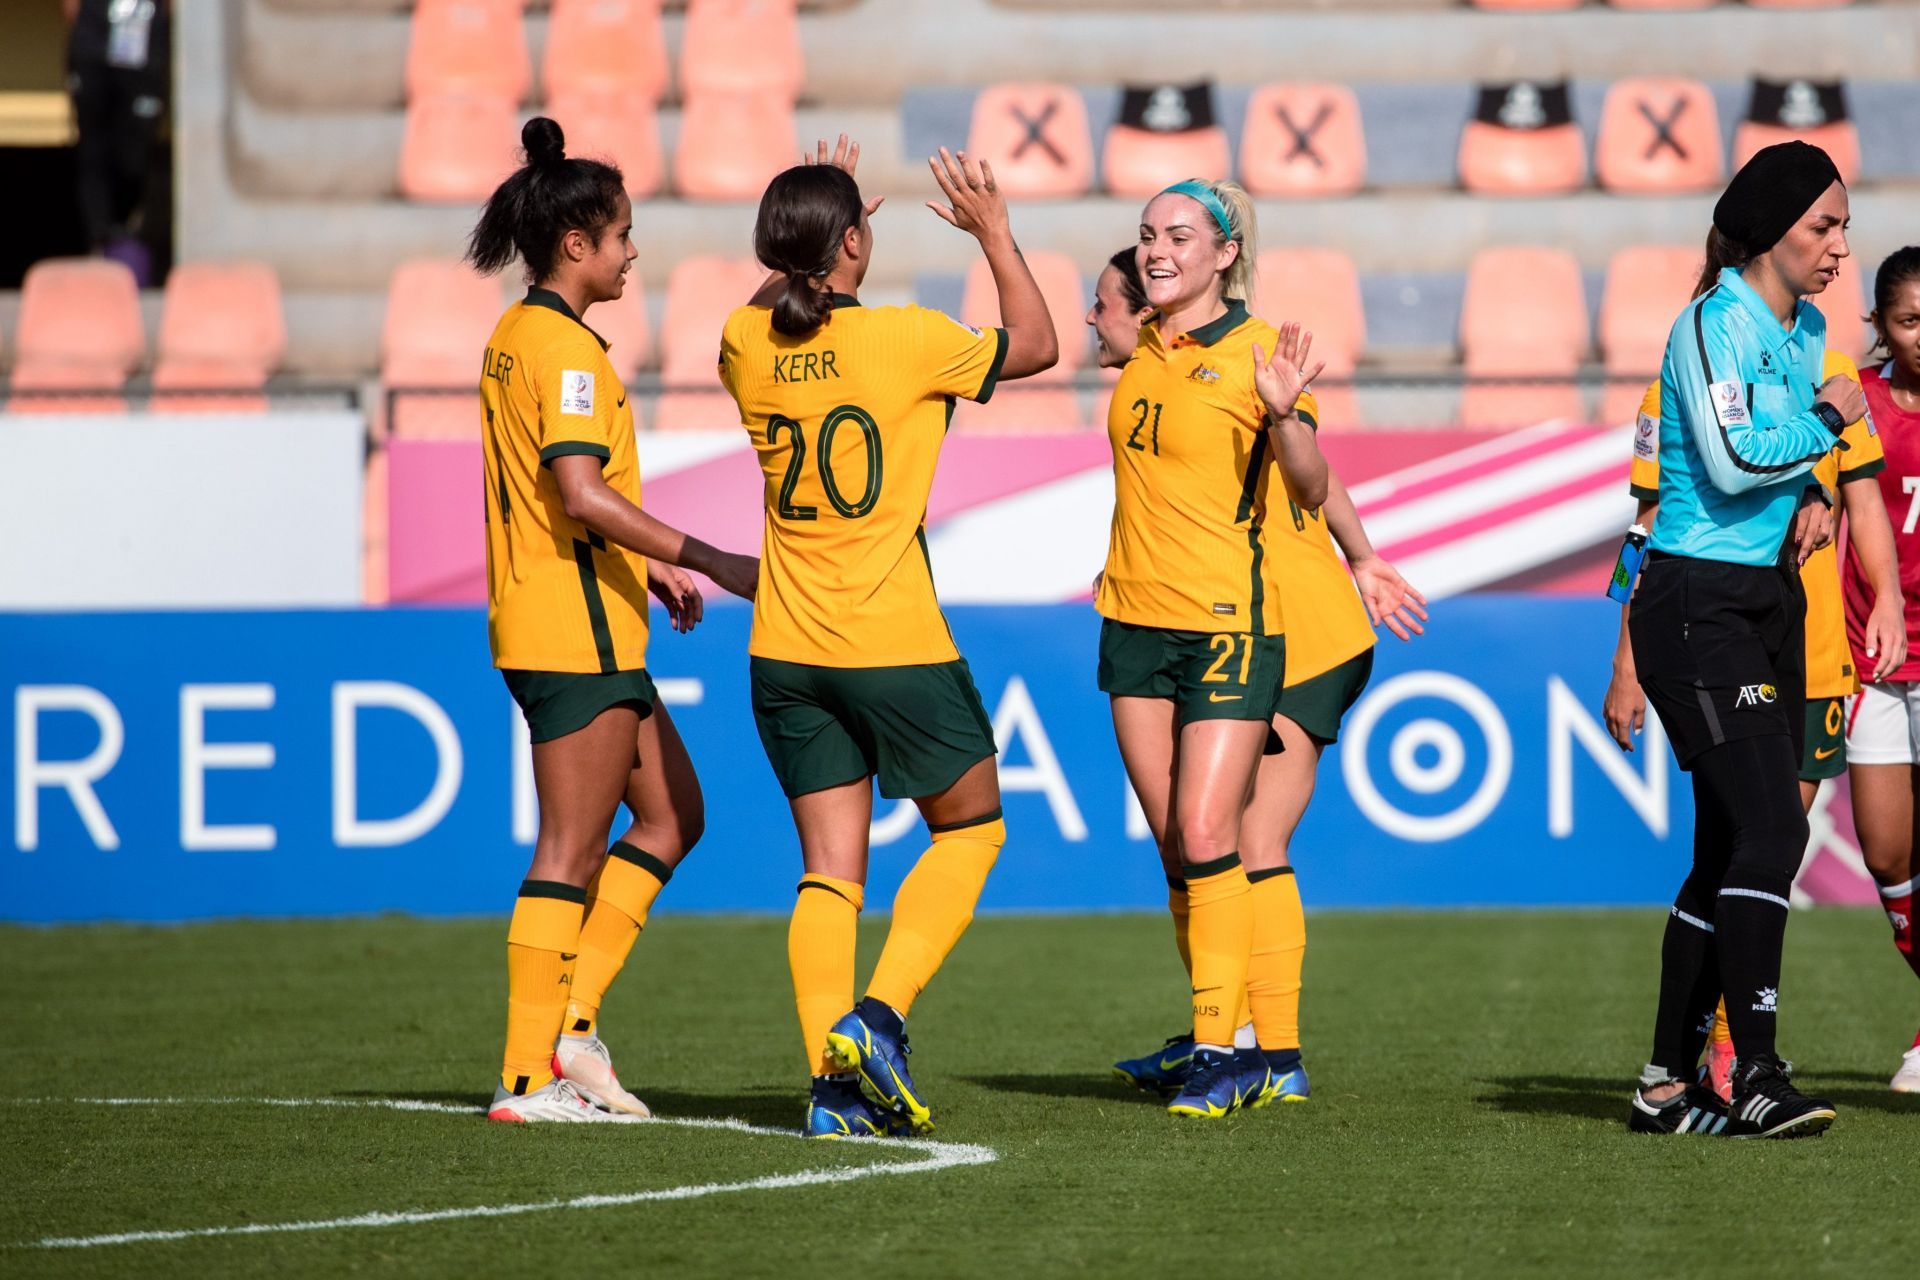 The Matildas scored 18 goals against Indonesia without reply. (Image Courtesy: Twitter/Matildas)